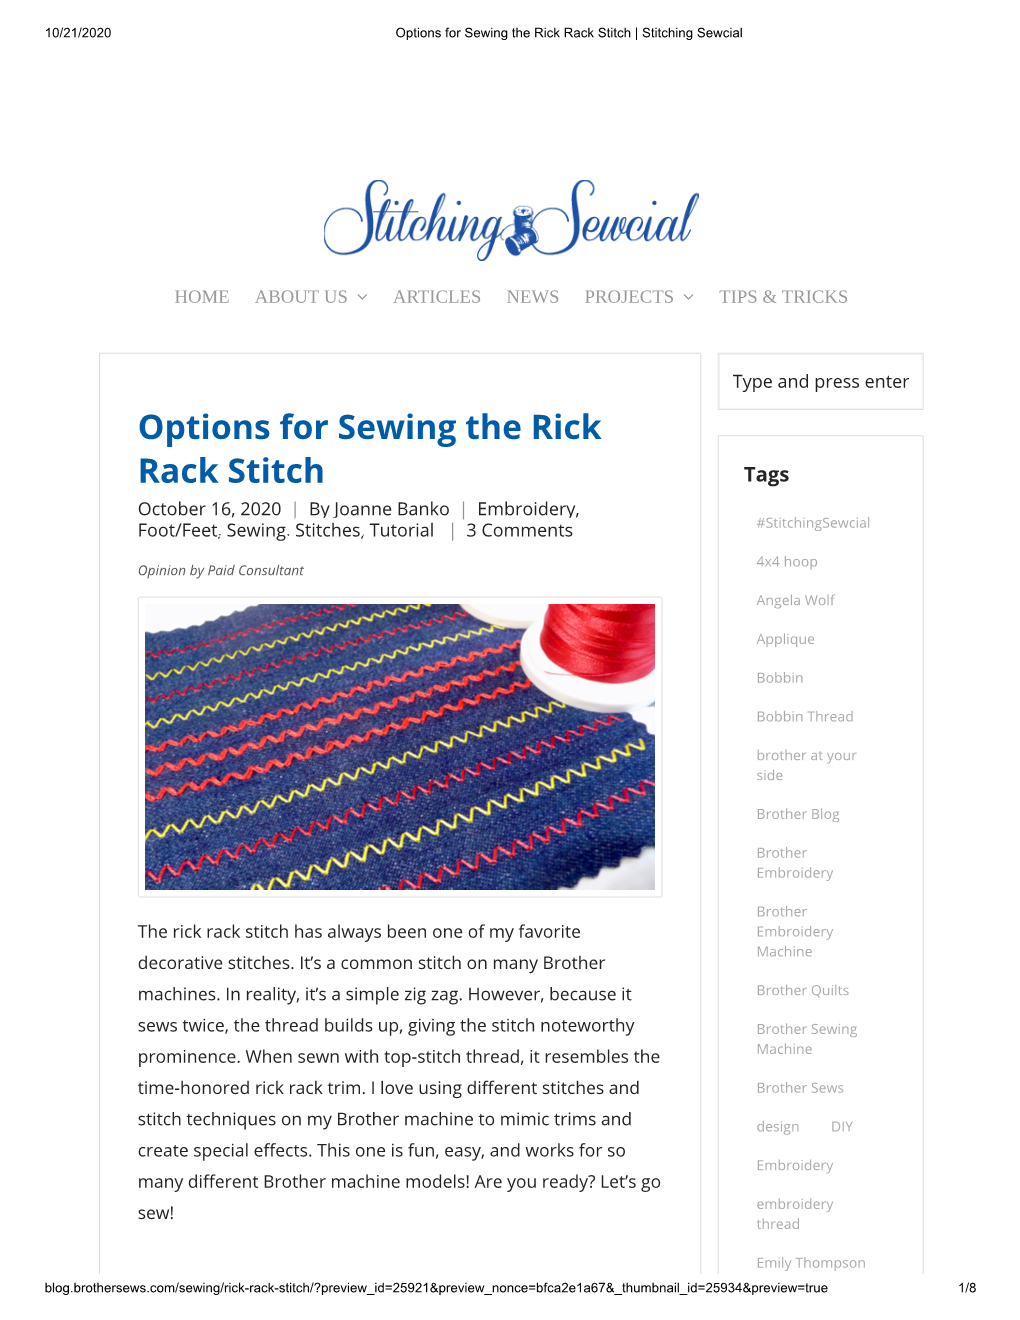 Options for Sewing the Rick Rack Stitch | Stitching Sewcial